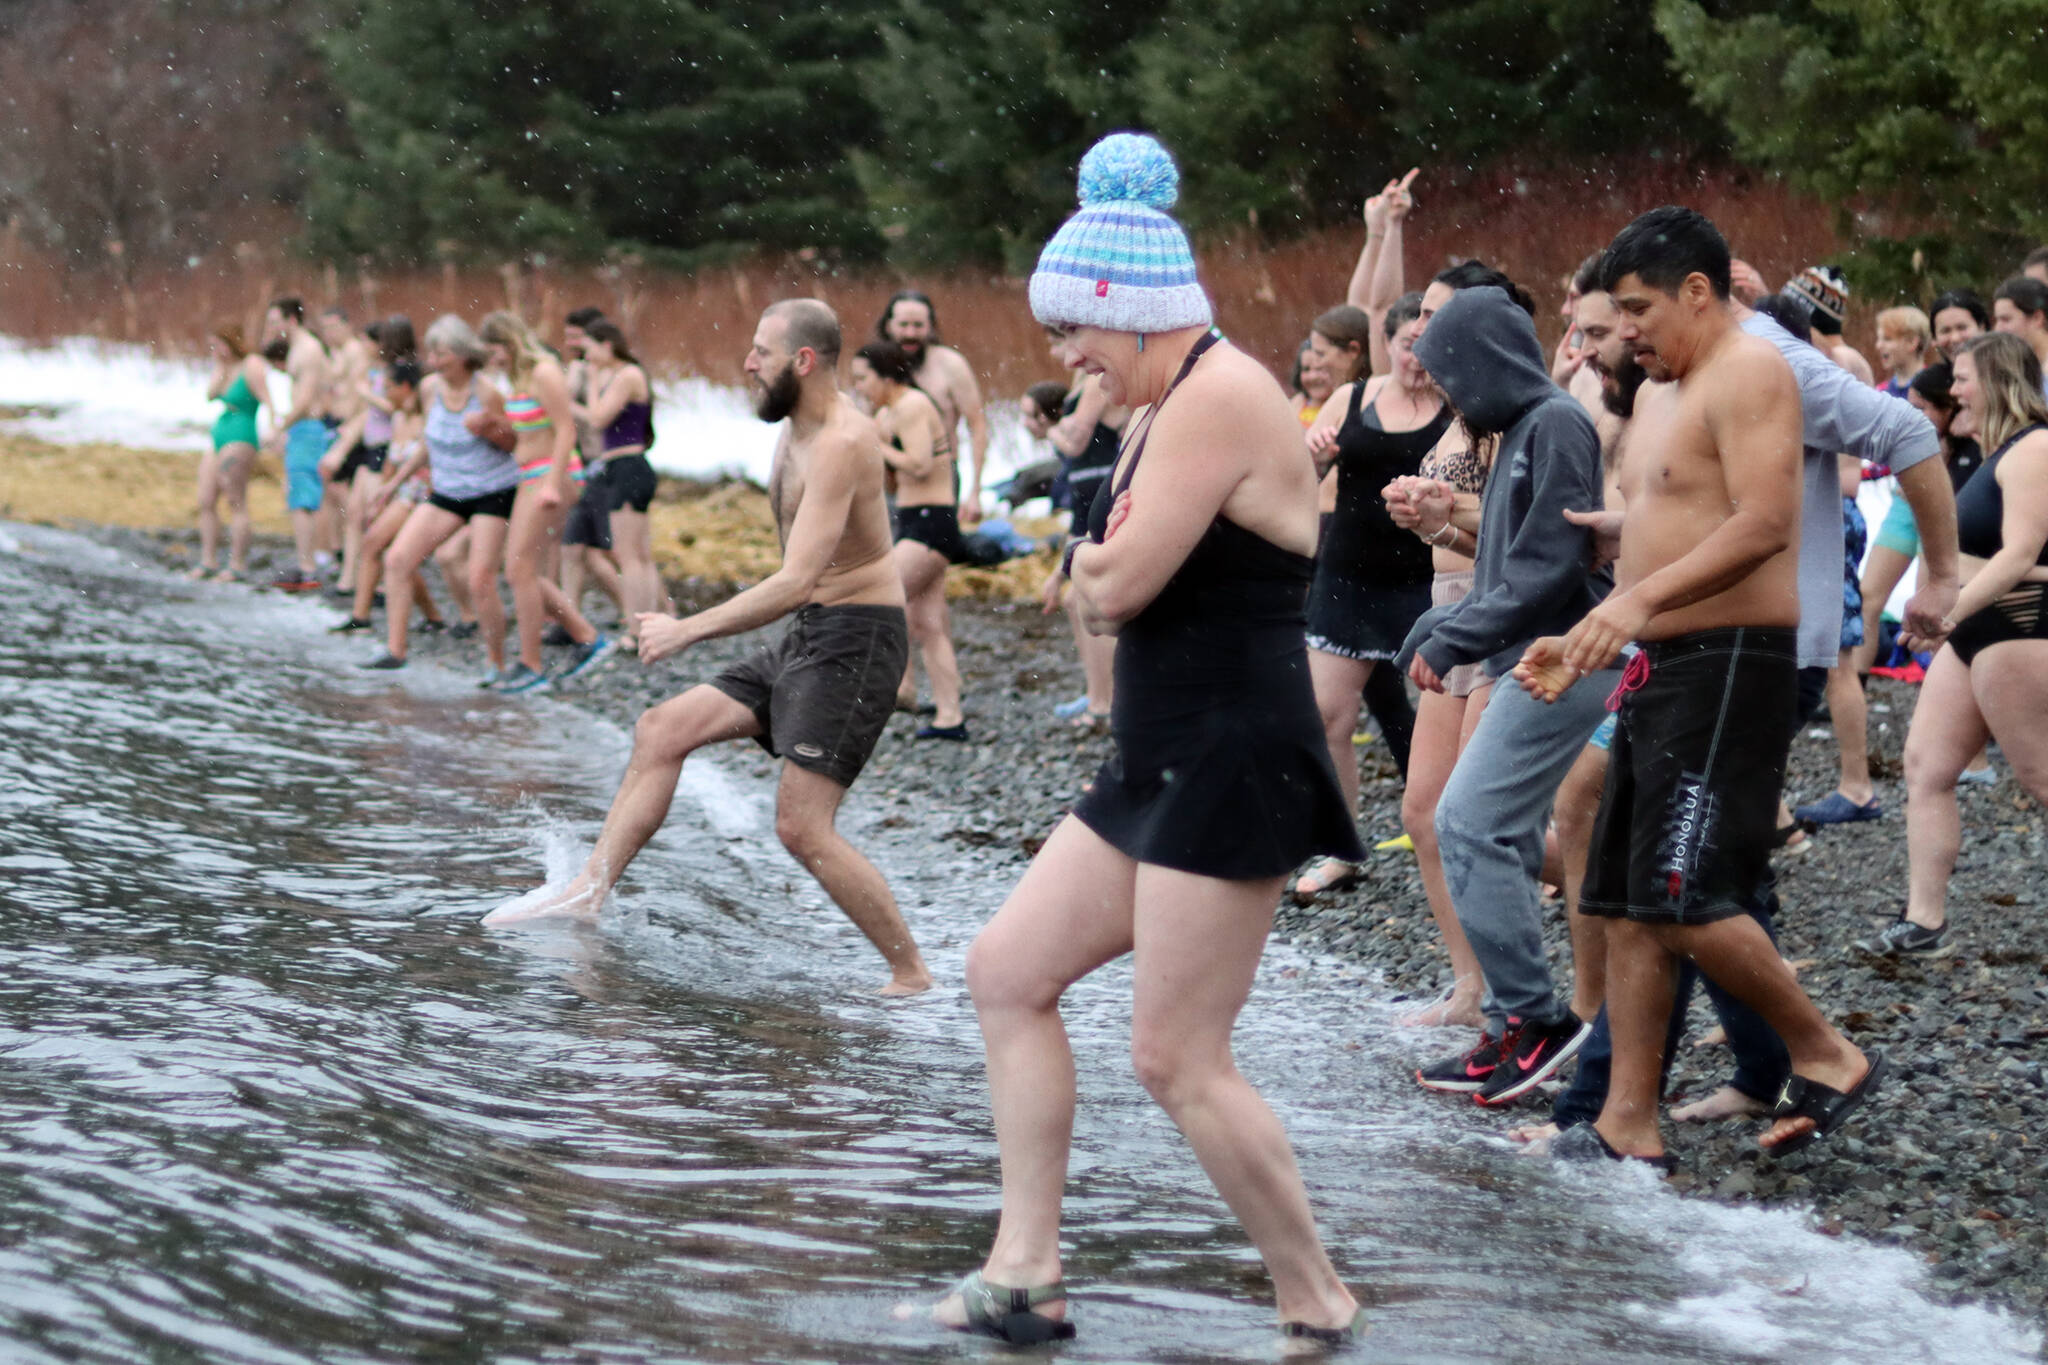 Polar plunge participants around the world kick off 2022 with an icy dip